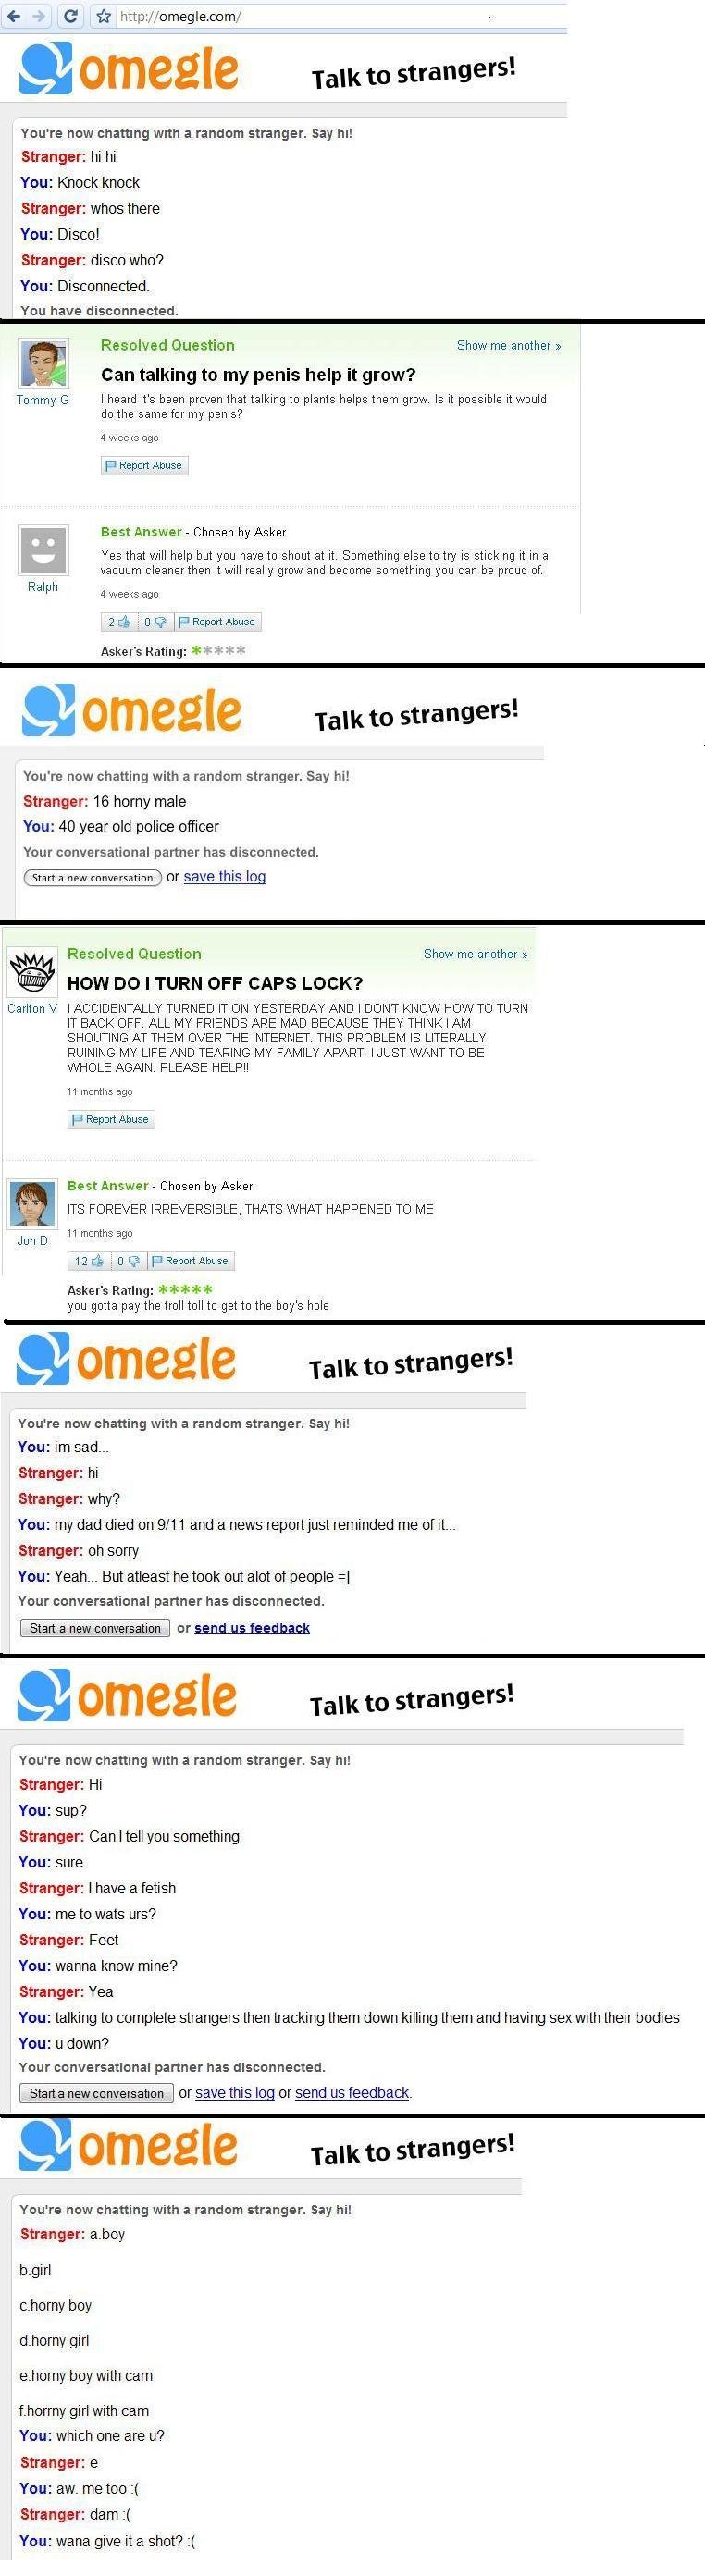 Troll wannabe compilation. . e C it http// omeglerox/ 5% omegle Talk to strangers'. Vlhu' re new manna with a random stranger. say MI stranger: m m You: Knock k